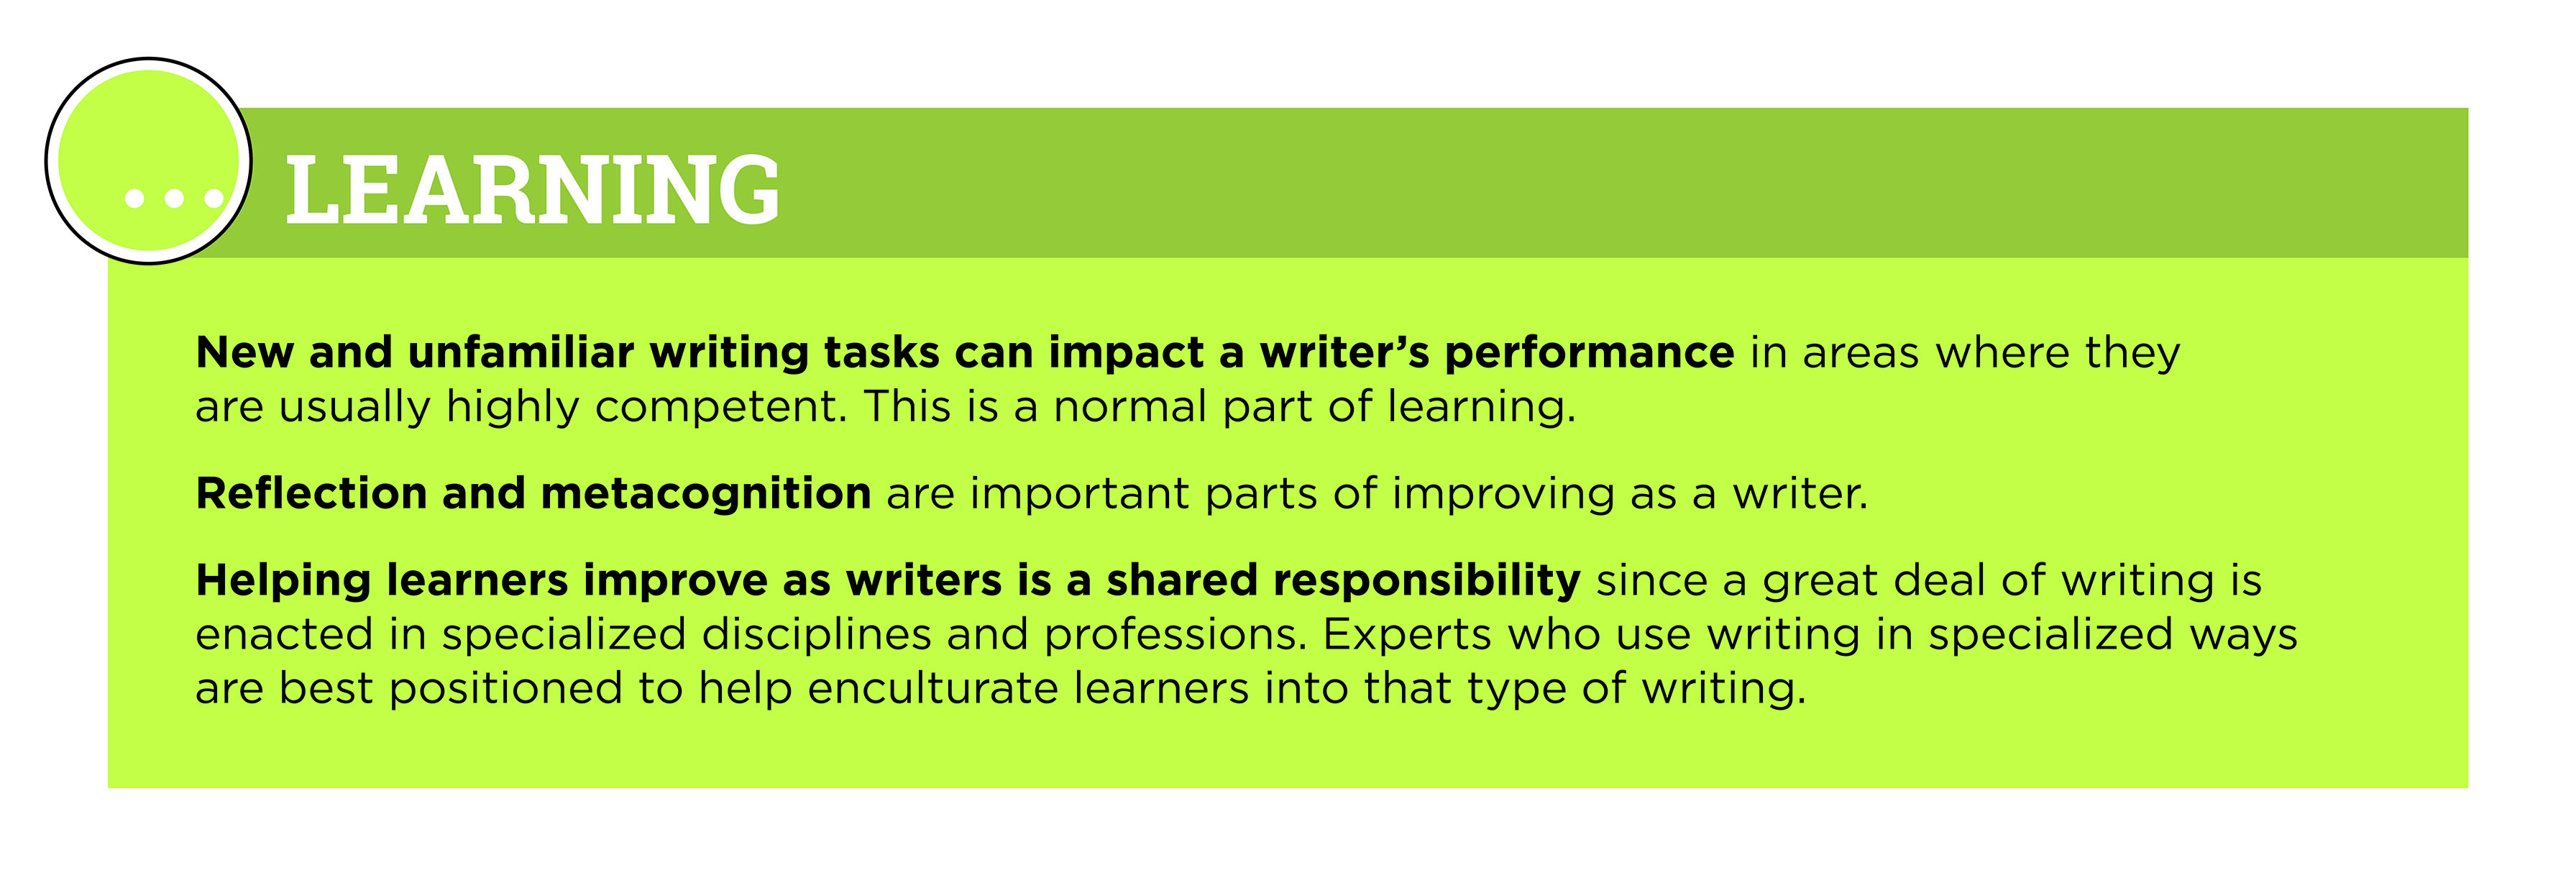 New and unfamiliar writing tasks can impact a writer's performance in areas where they are usually highly competent. This is a normal part of learning. Reflection and metacognition are important parts of improving as a writer. Helping learners  Strengthen as writers is a shared responsibility since a great deal of writing is enacted in specialized disciplines and professions. Experts who use writing in specialized ways are best positioned to help enculturate learners into that type of writing.